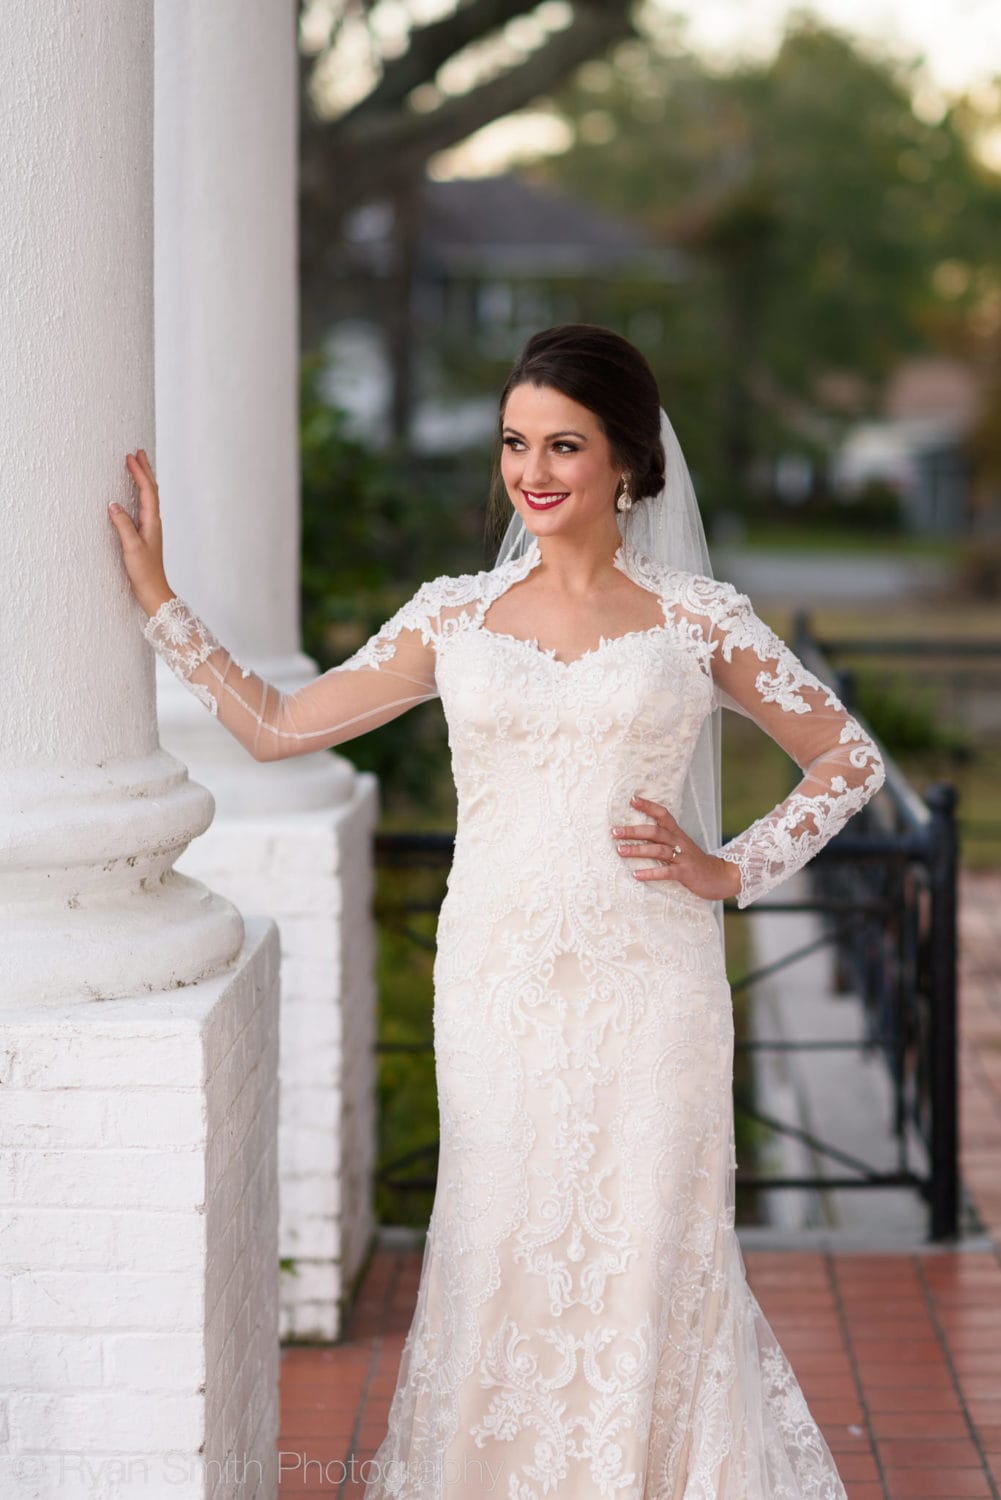 Bride leaning against front columns - Rosewood Manor - Marion - Rosewood Manor, Marion